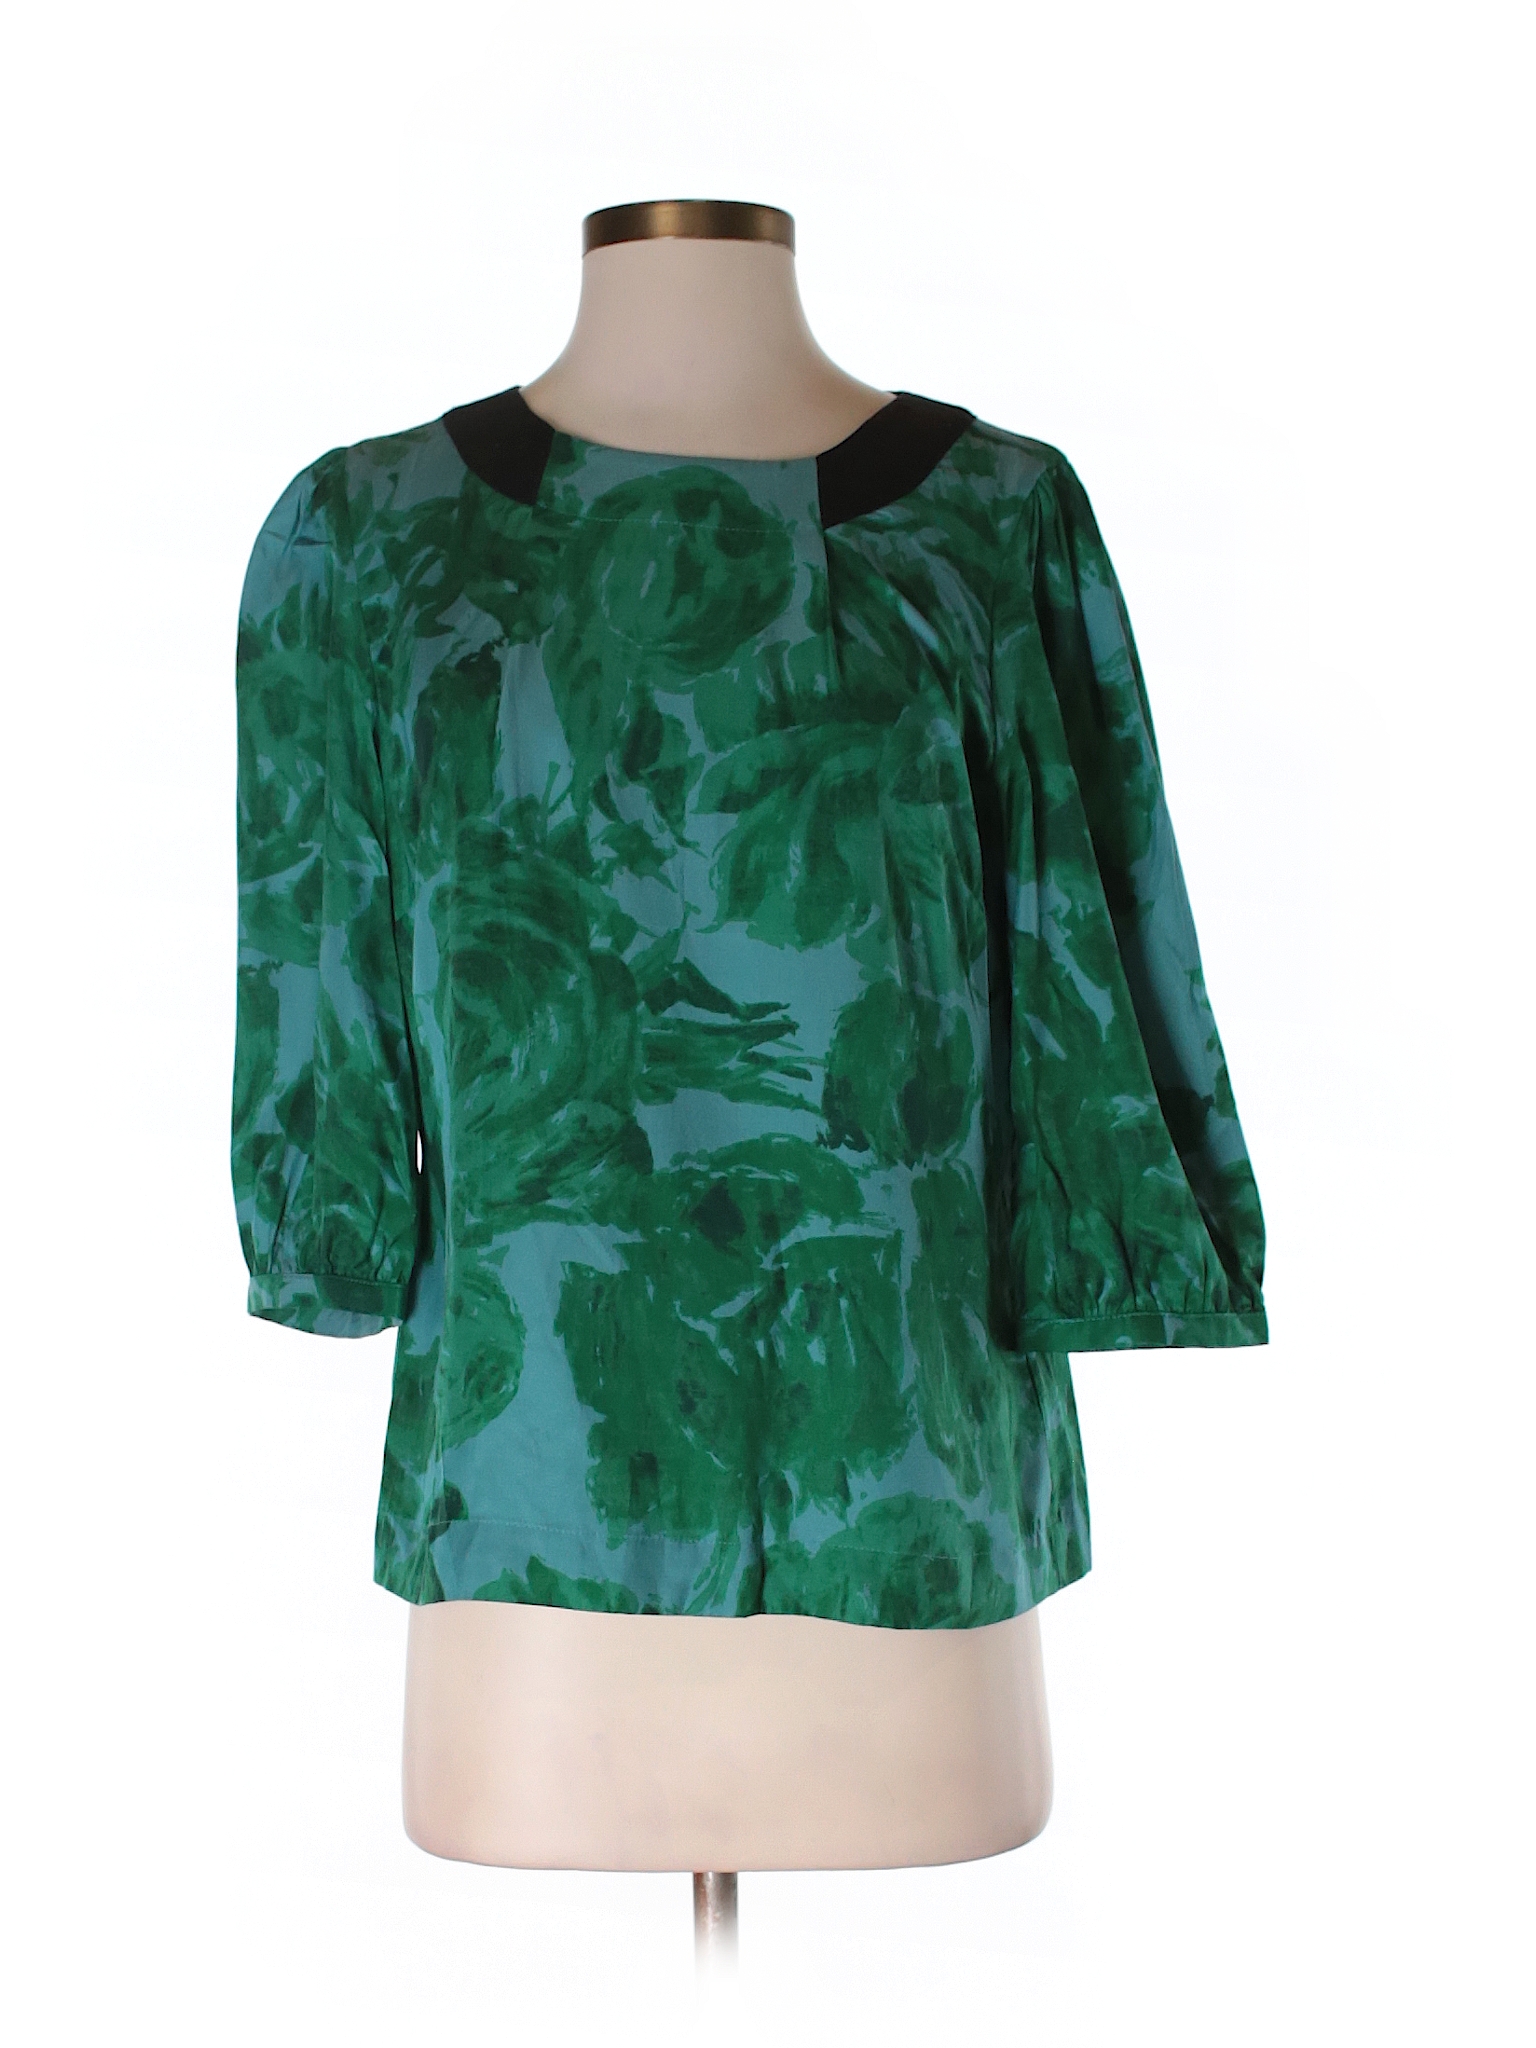 Boden Print Green 3/4 Sleeve Blouse Size 12 (UK) (Petite) - 77% off ...